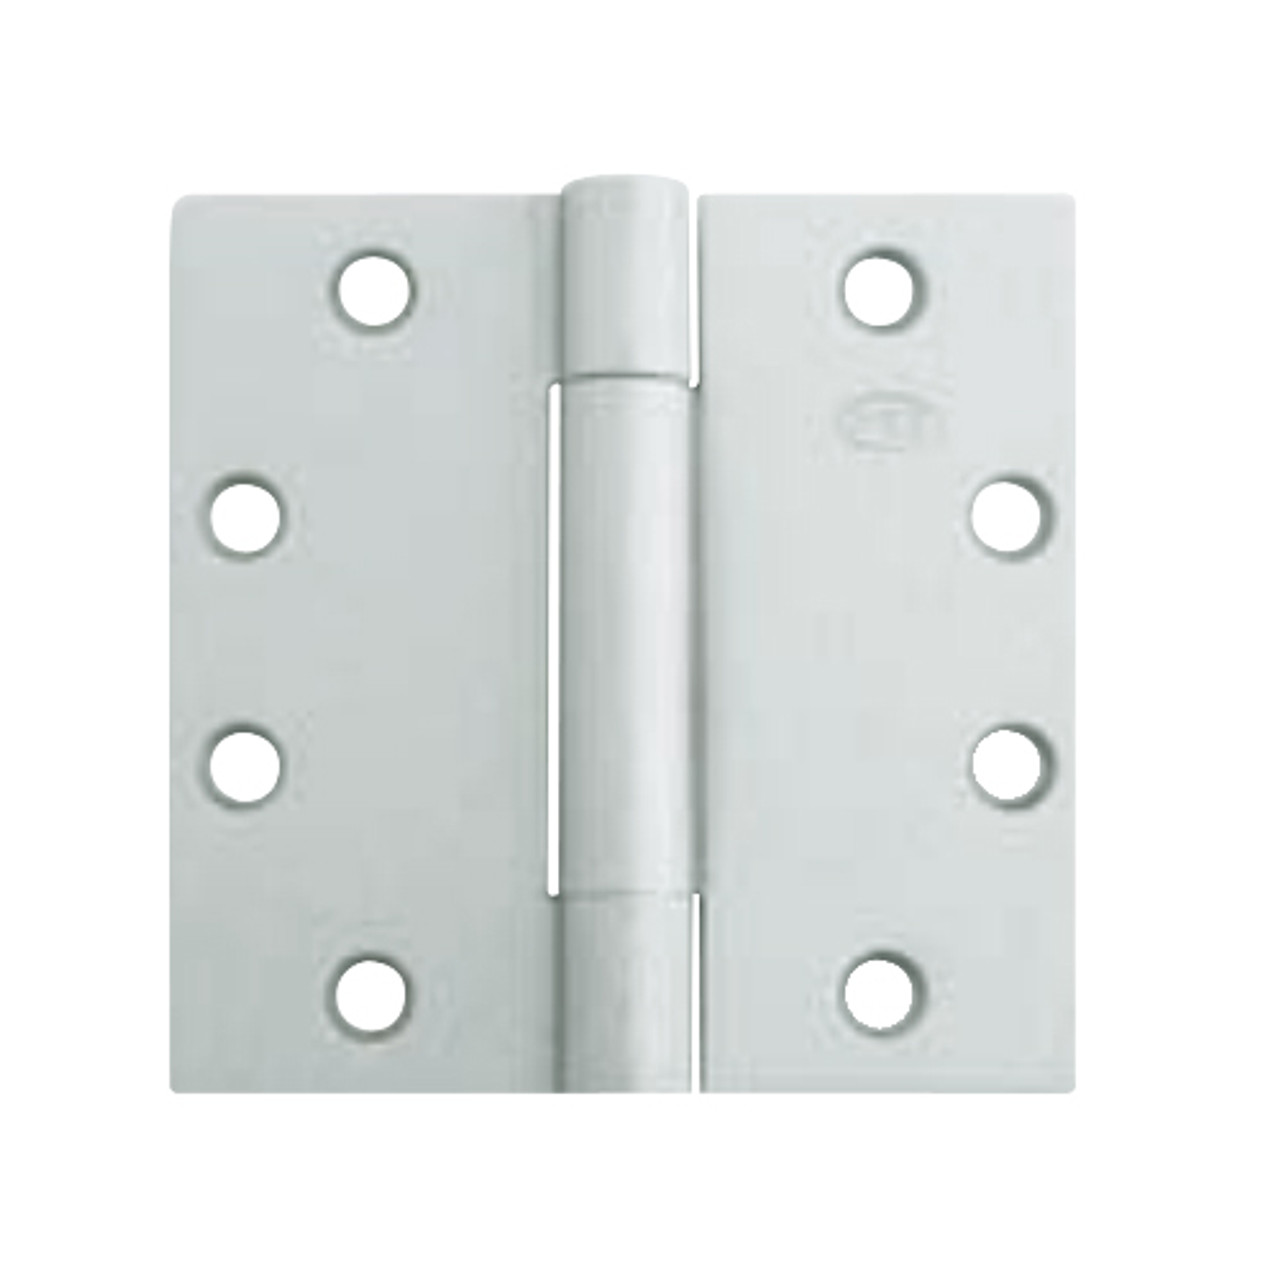 3CB1-5x5-619 IVES 3 Knuckle Concealed Bearing Full Mortise Hinge in Satin Nickel